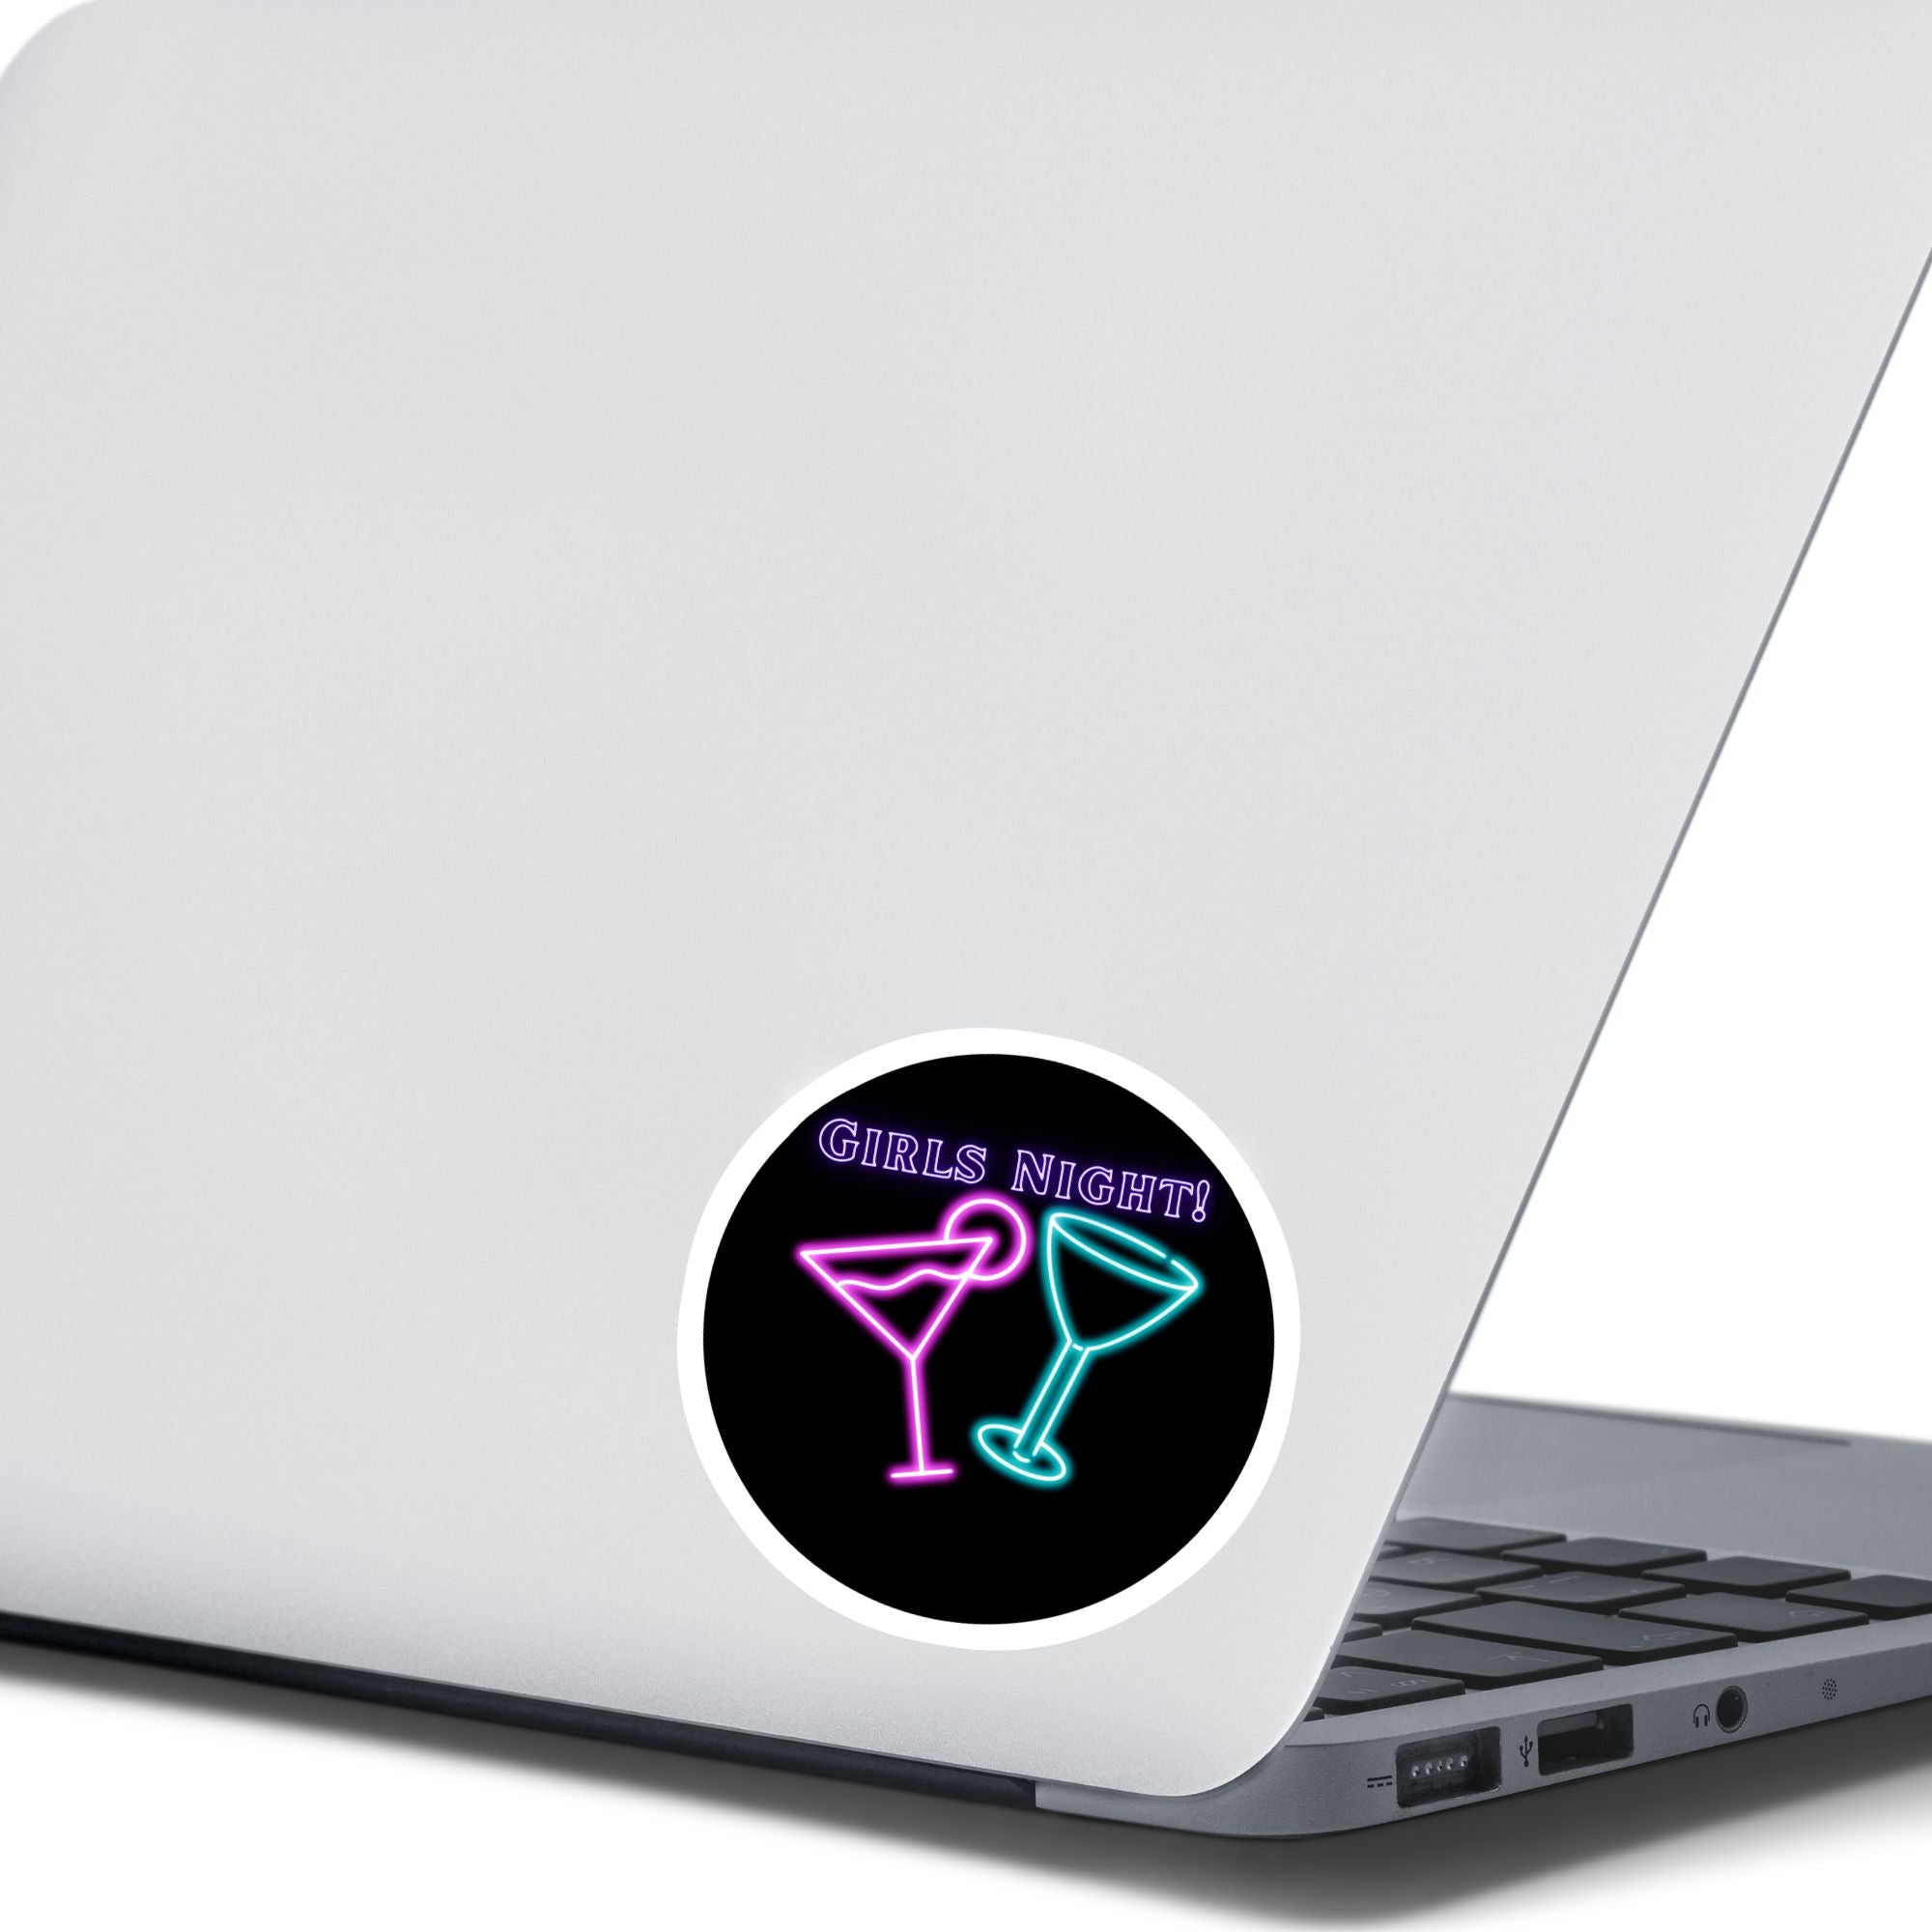 Ladies, it's time to hit the town! This neon die-cut sticker features a couple of cocktail glasses with "Girls Night!" written above. Enjoy! This image shows the Girls Night sticker on the back of an open laptop.